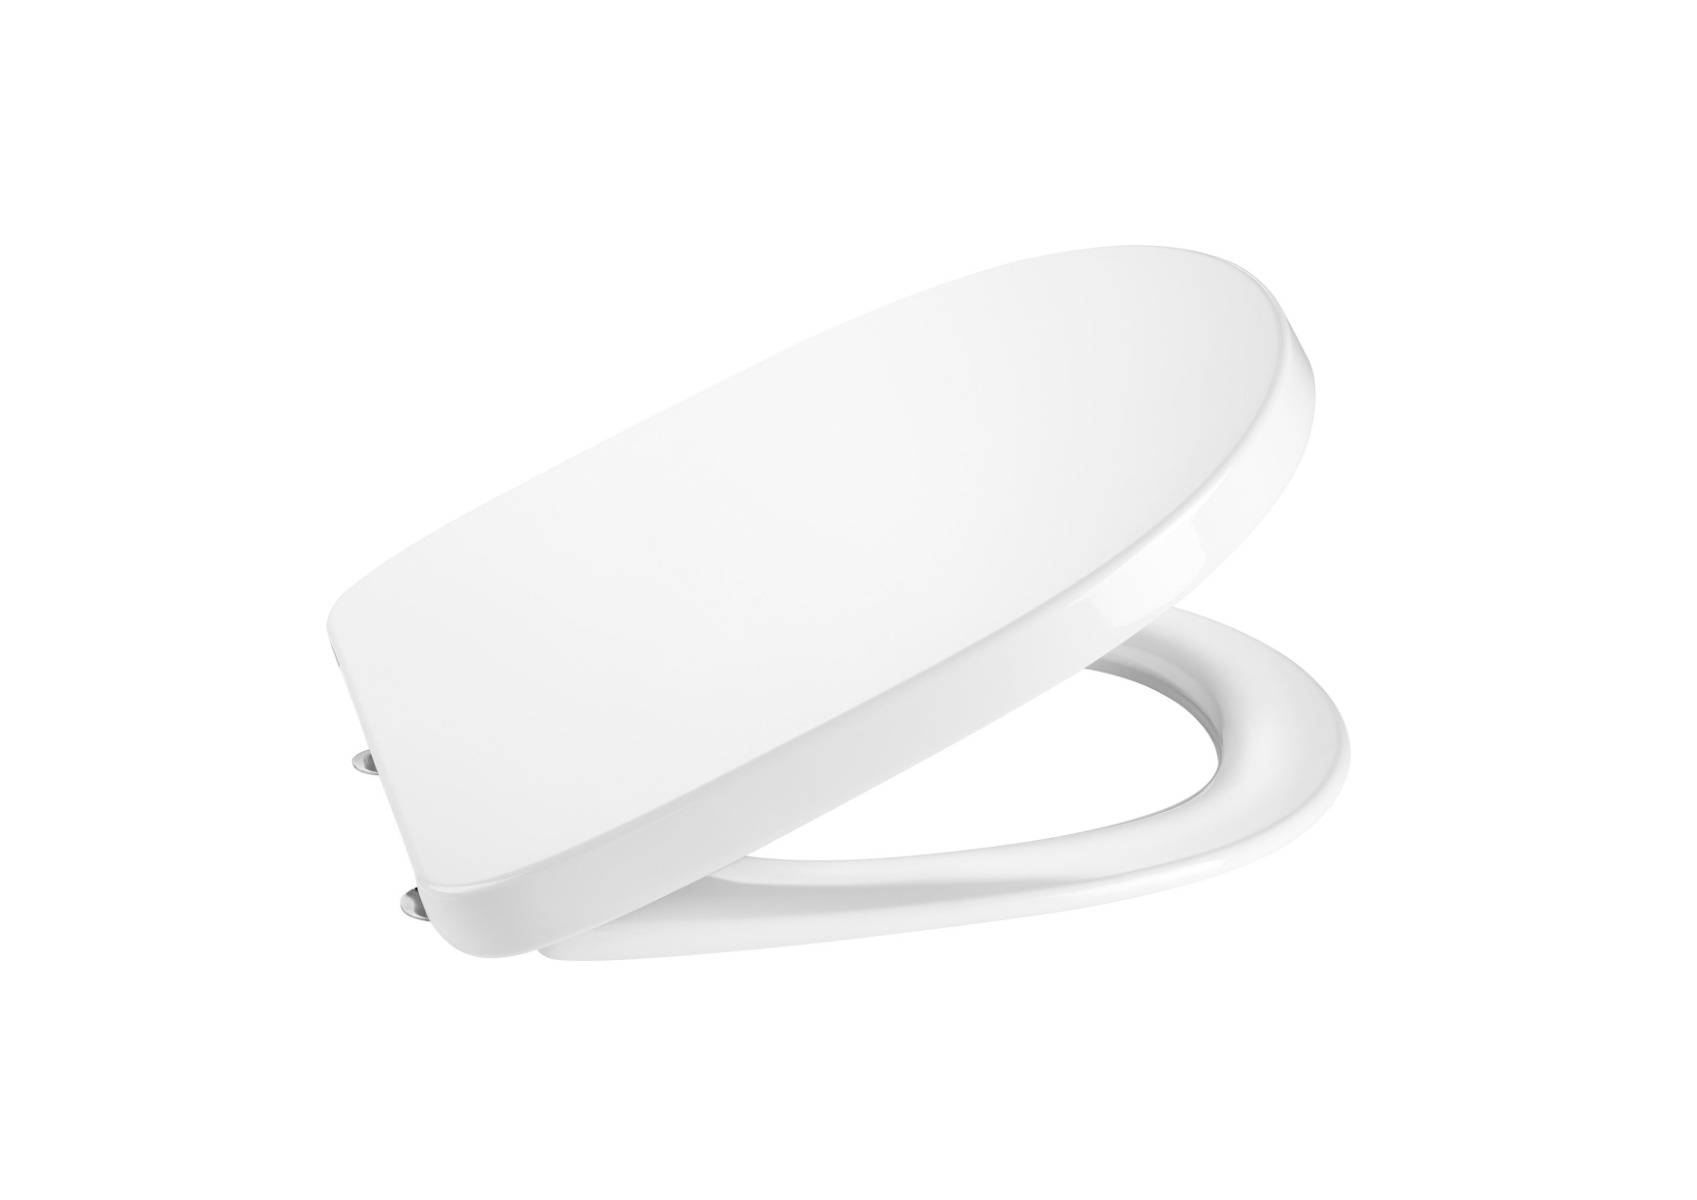 A801B2000B SQUARE - Soft-closing SUPRALIT toilet seat and cover